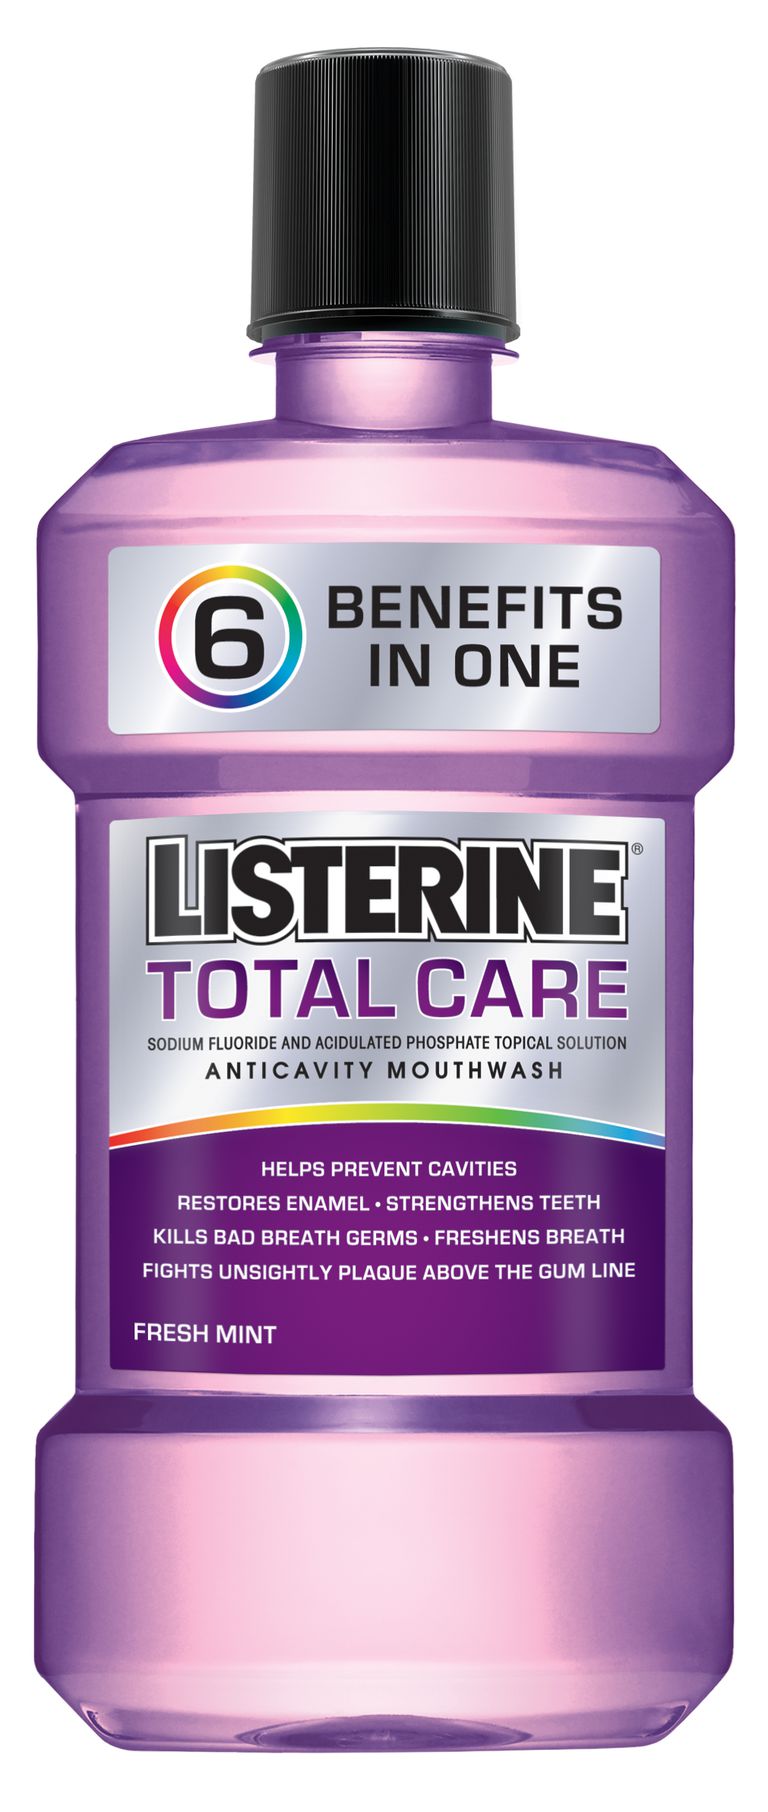 Care Anticavity, hele sekunder, Total Care, Total Care Anticavity, Listerine Total, Listerine Total Care